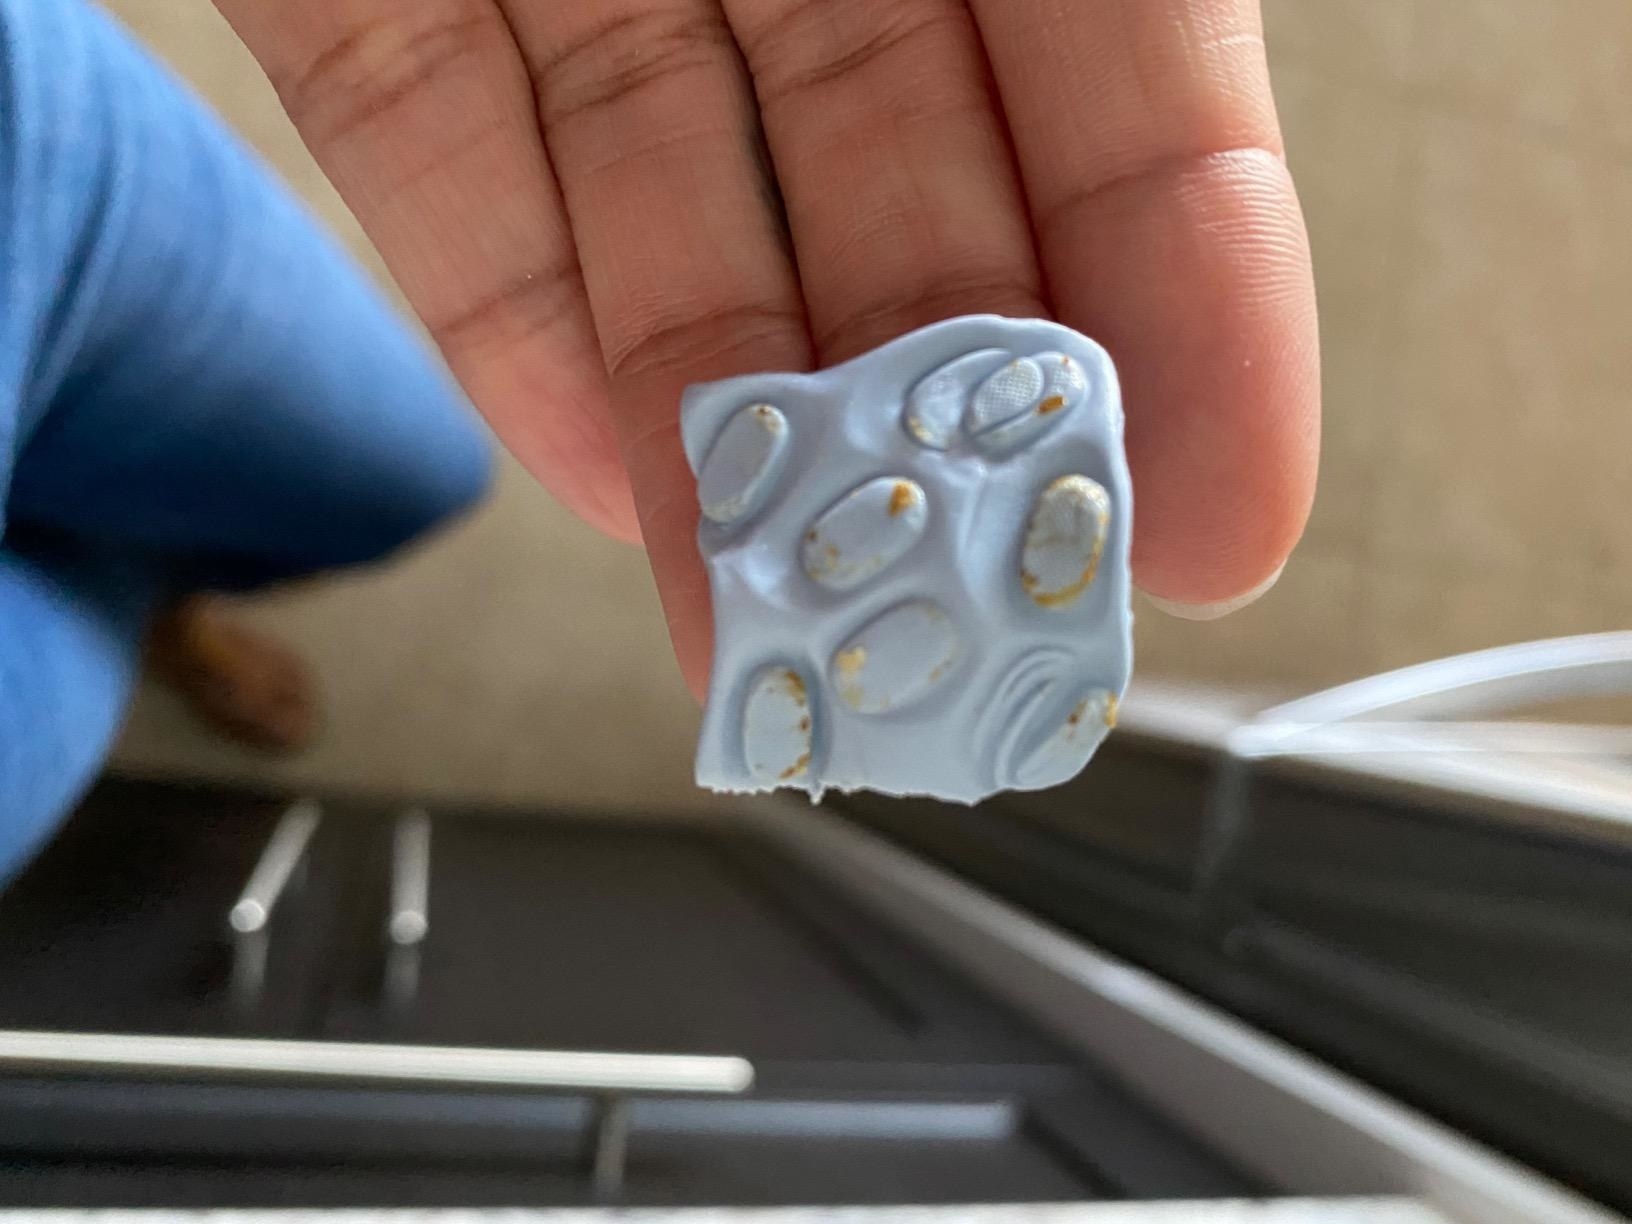 A customer review photo showing one of the putty squares with lots of ear wax on it that was removed from an AirPod speaker